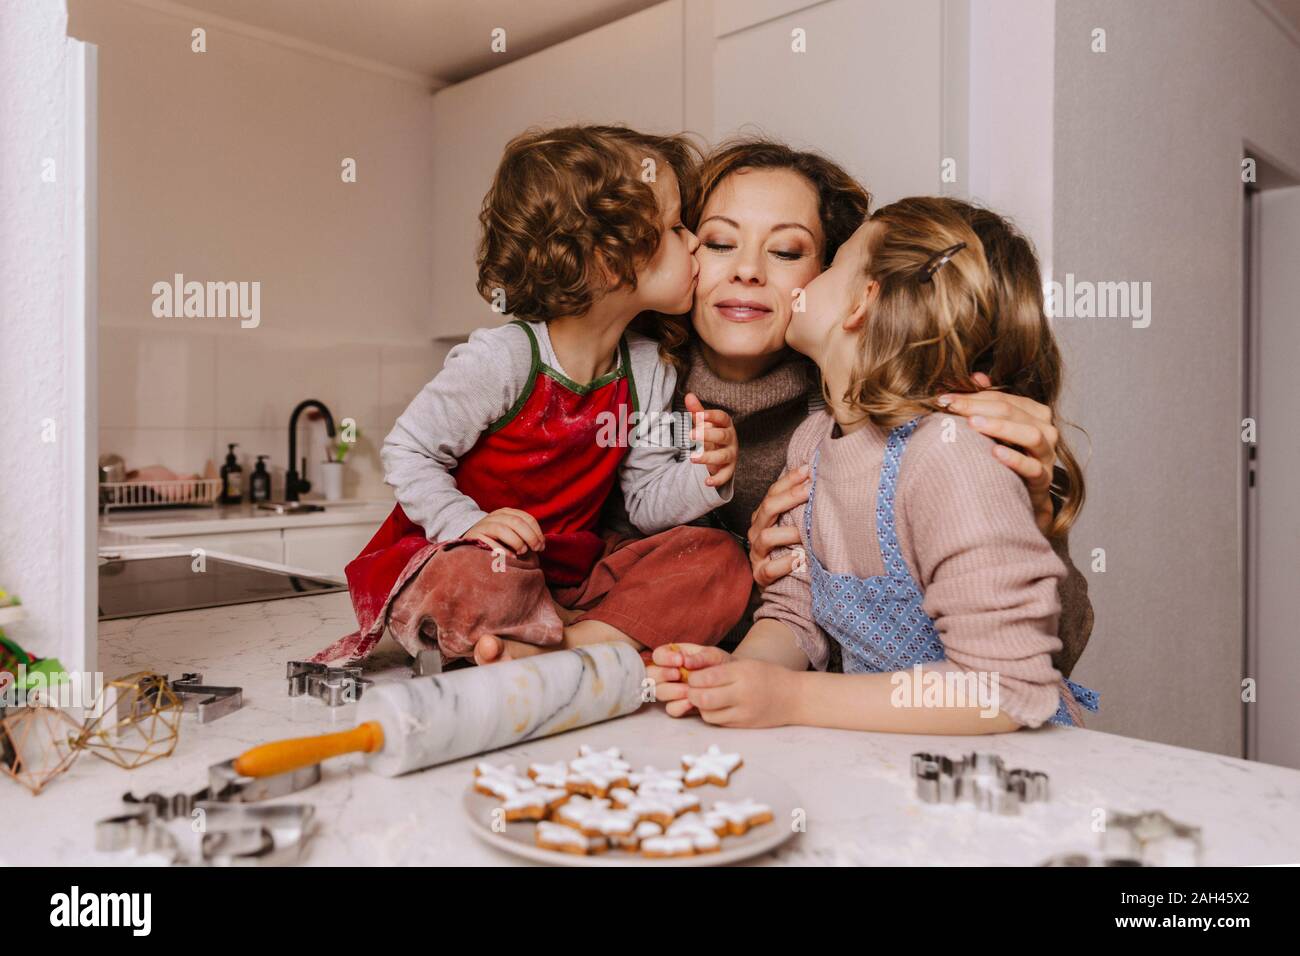 Girls kissing mother in kitchen with Christmas cookies on counter Stock Photo